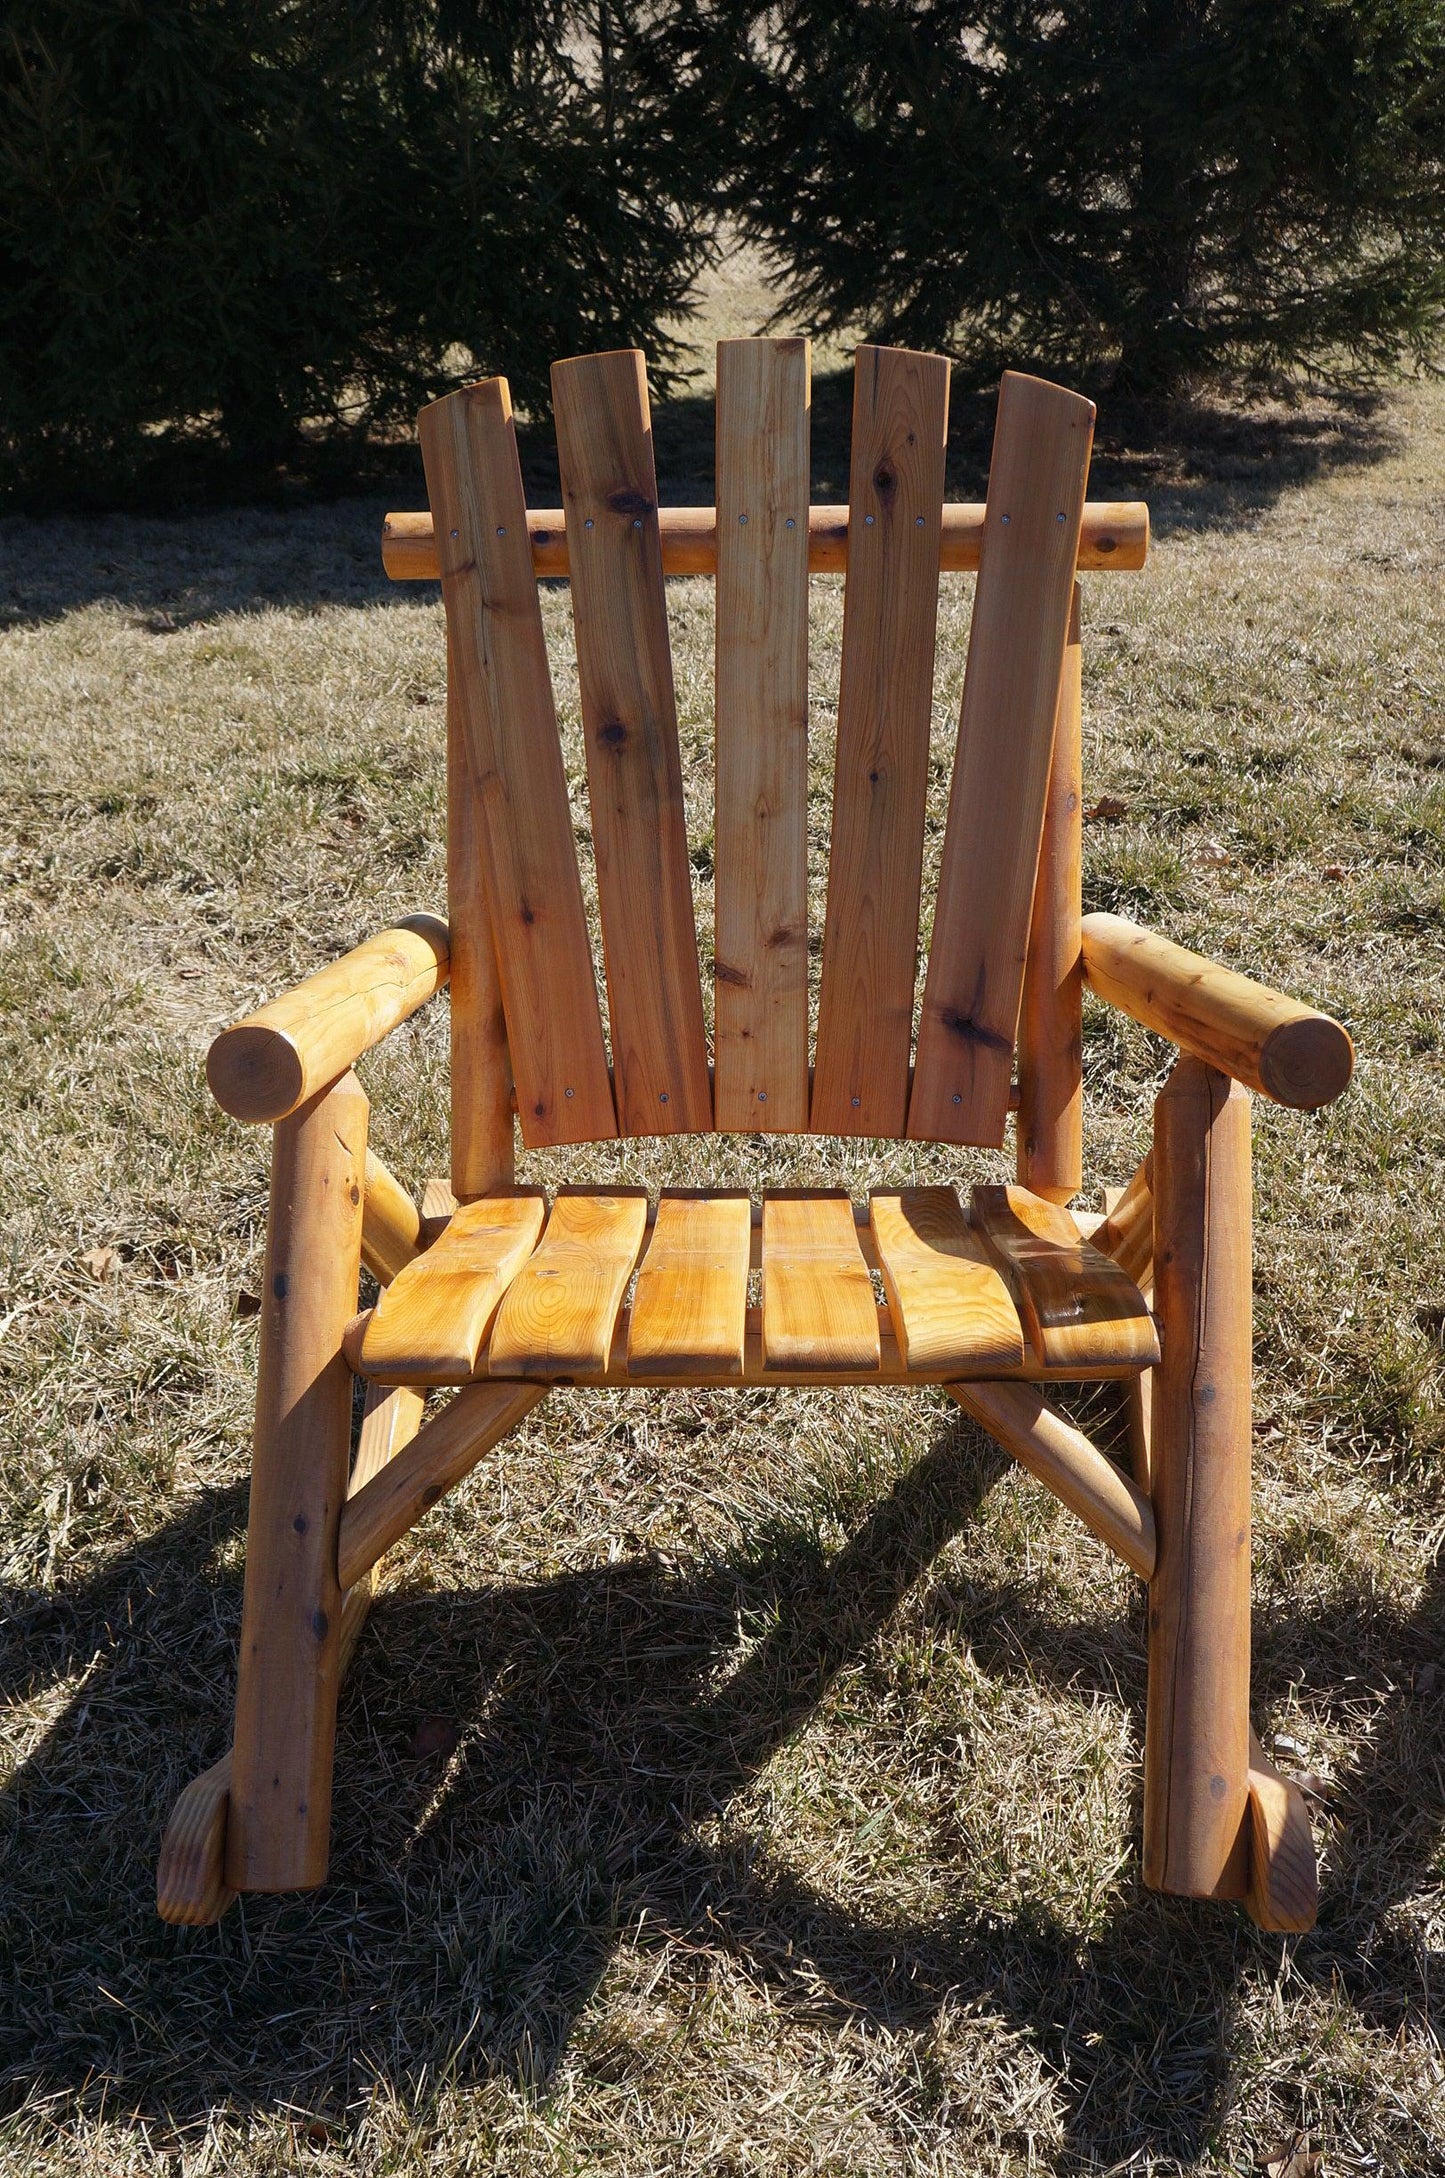 The Moon Valley Rustic  Big and Tall Rocking Chair - 650 lbs MAX Weight Capacity - LEAD TIME TO SHIP 3 TO 4 WEEKS - LEAD TIME TO SHIP 4 WEEKS OR LESS